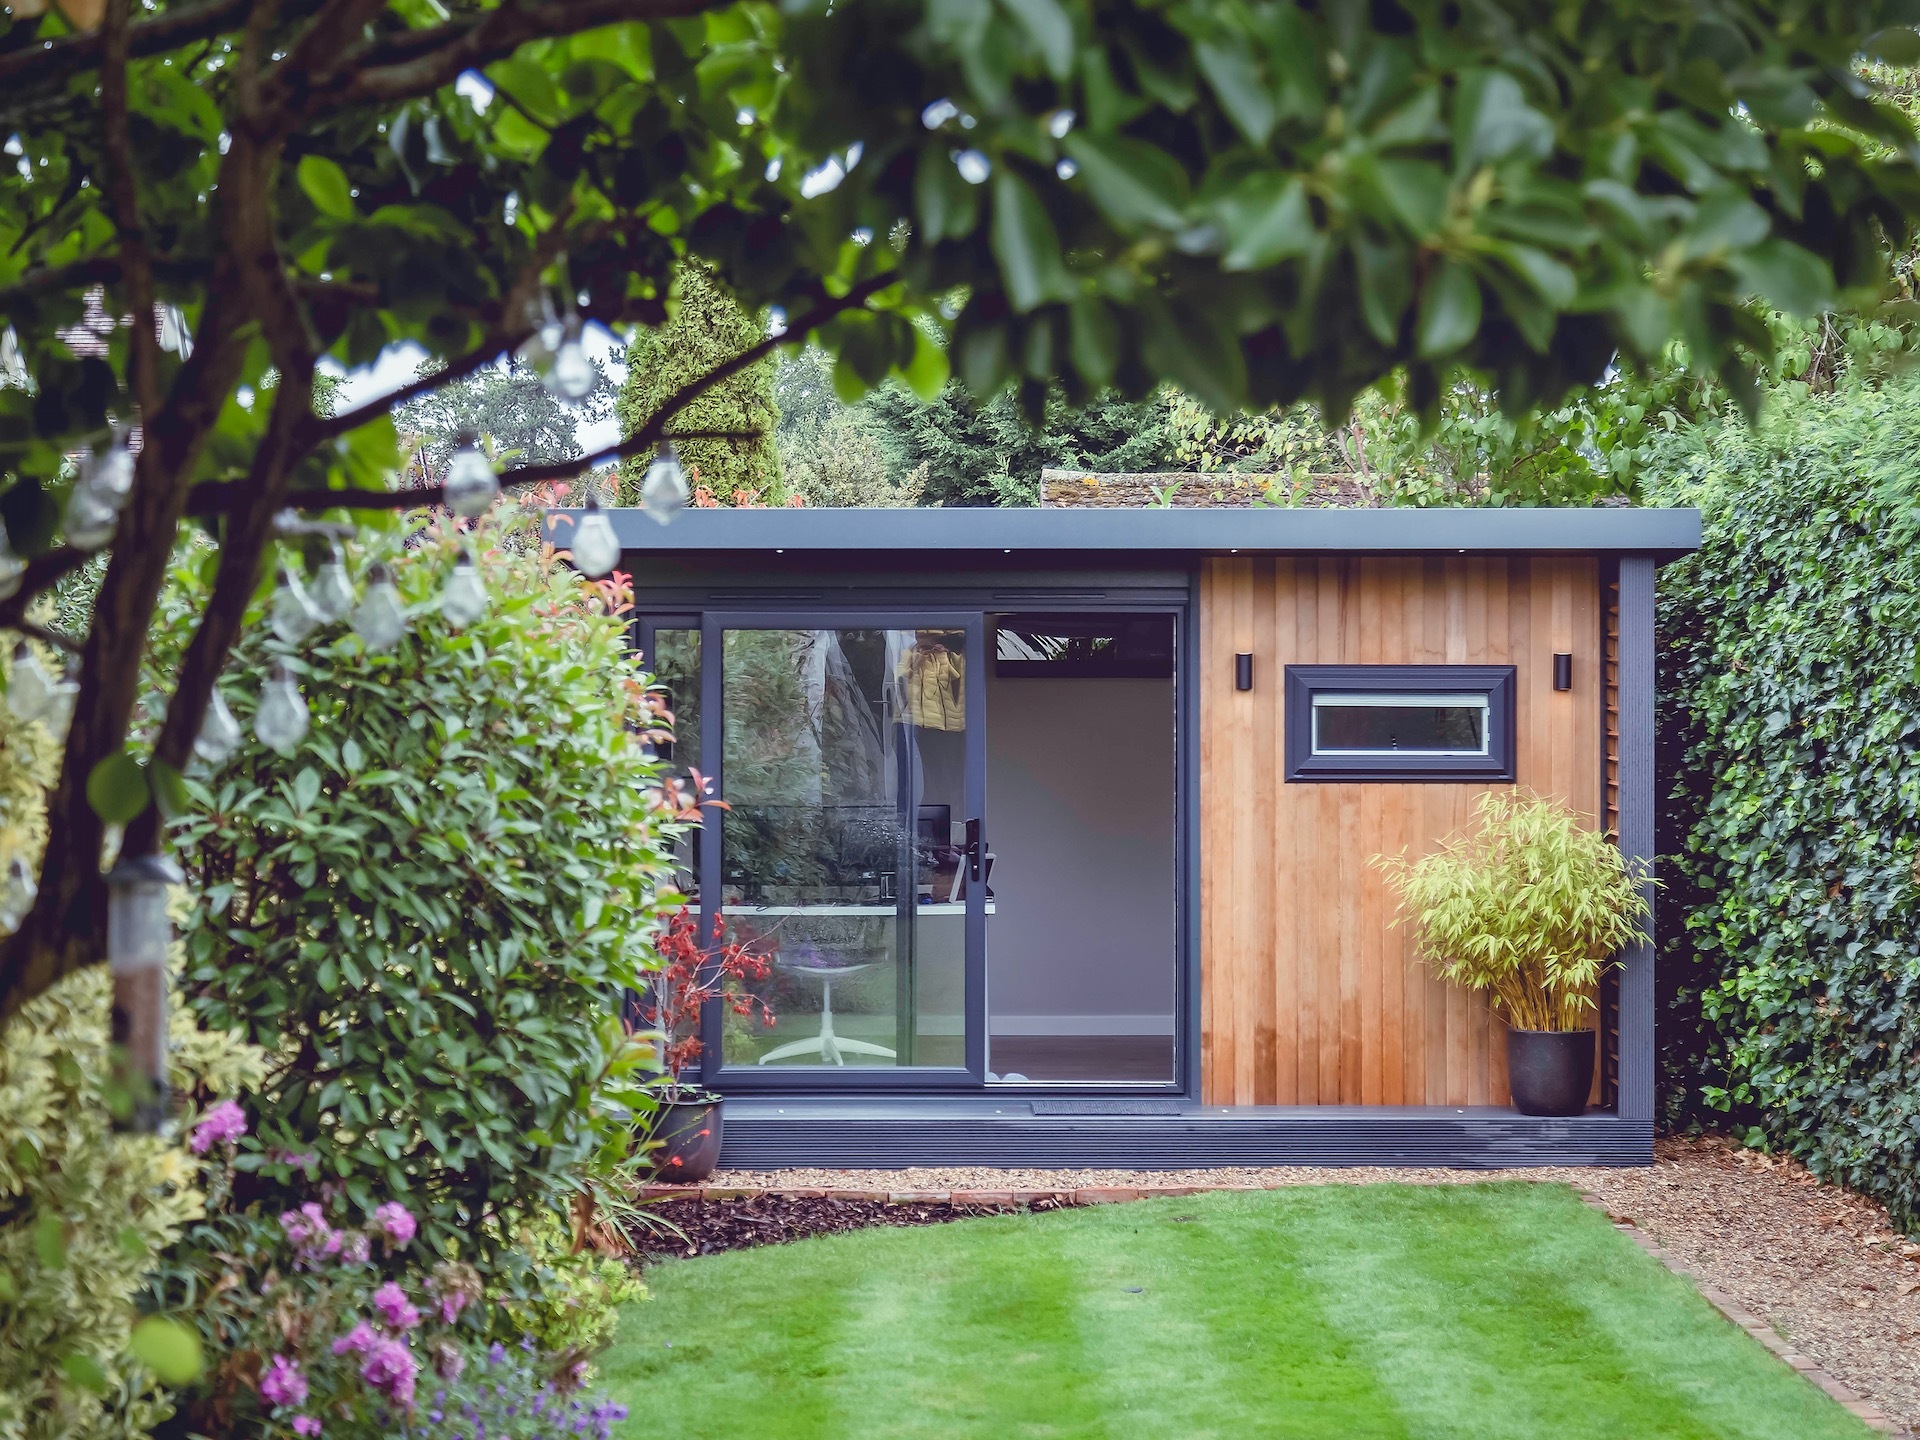 Garden room clad in wood surrounded by trees and lawn